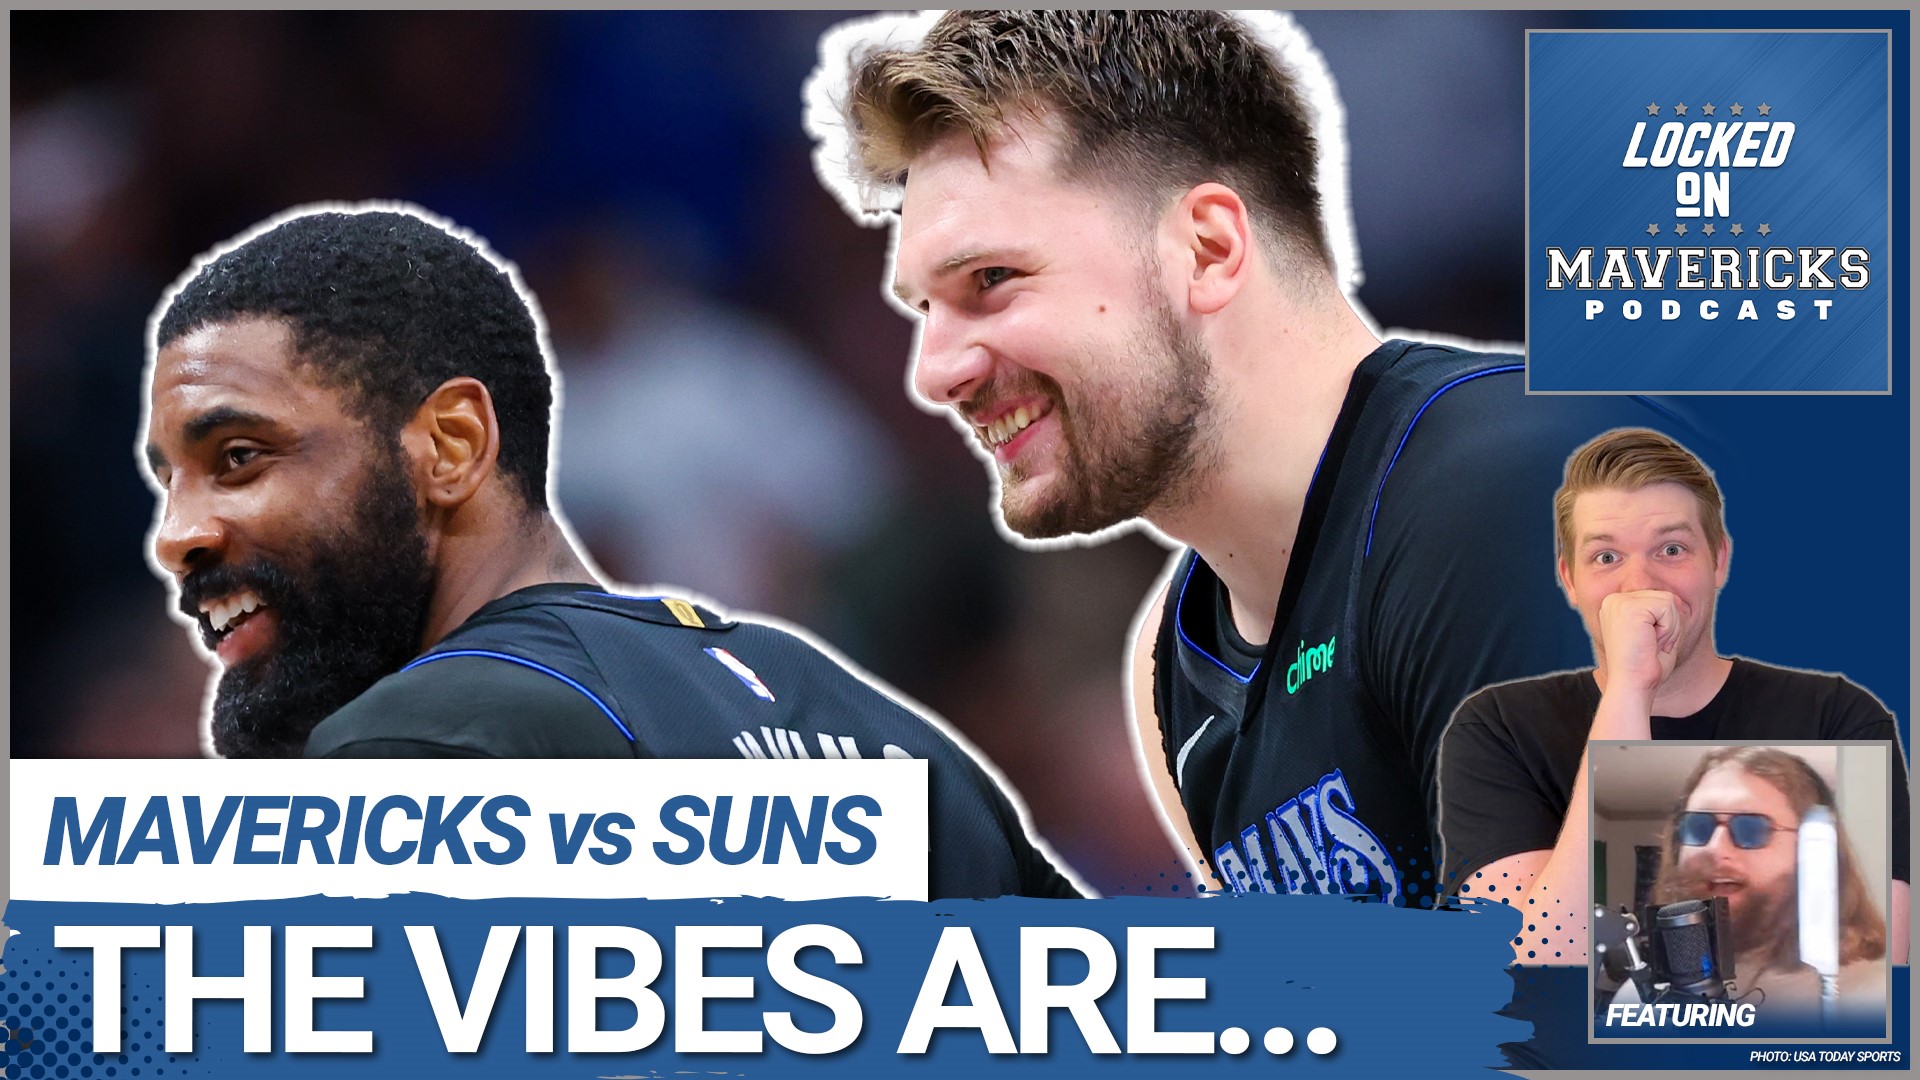 Nick Angstadt & Slightly Biased breakdown the Dallas Mavericks win vs the Phoenix Suns, Luka Doncic's MVP push, Kyrie Irving's complimentary game, and more.